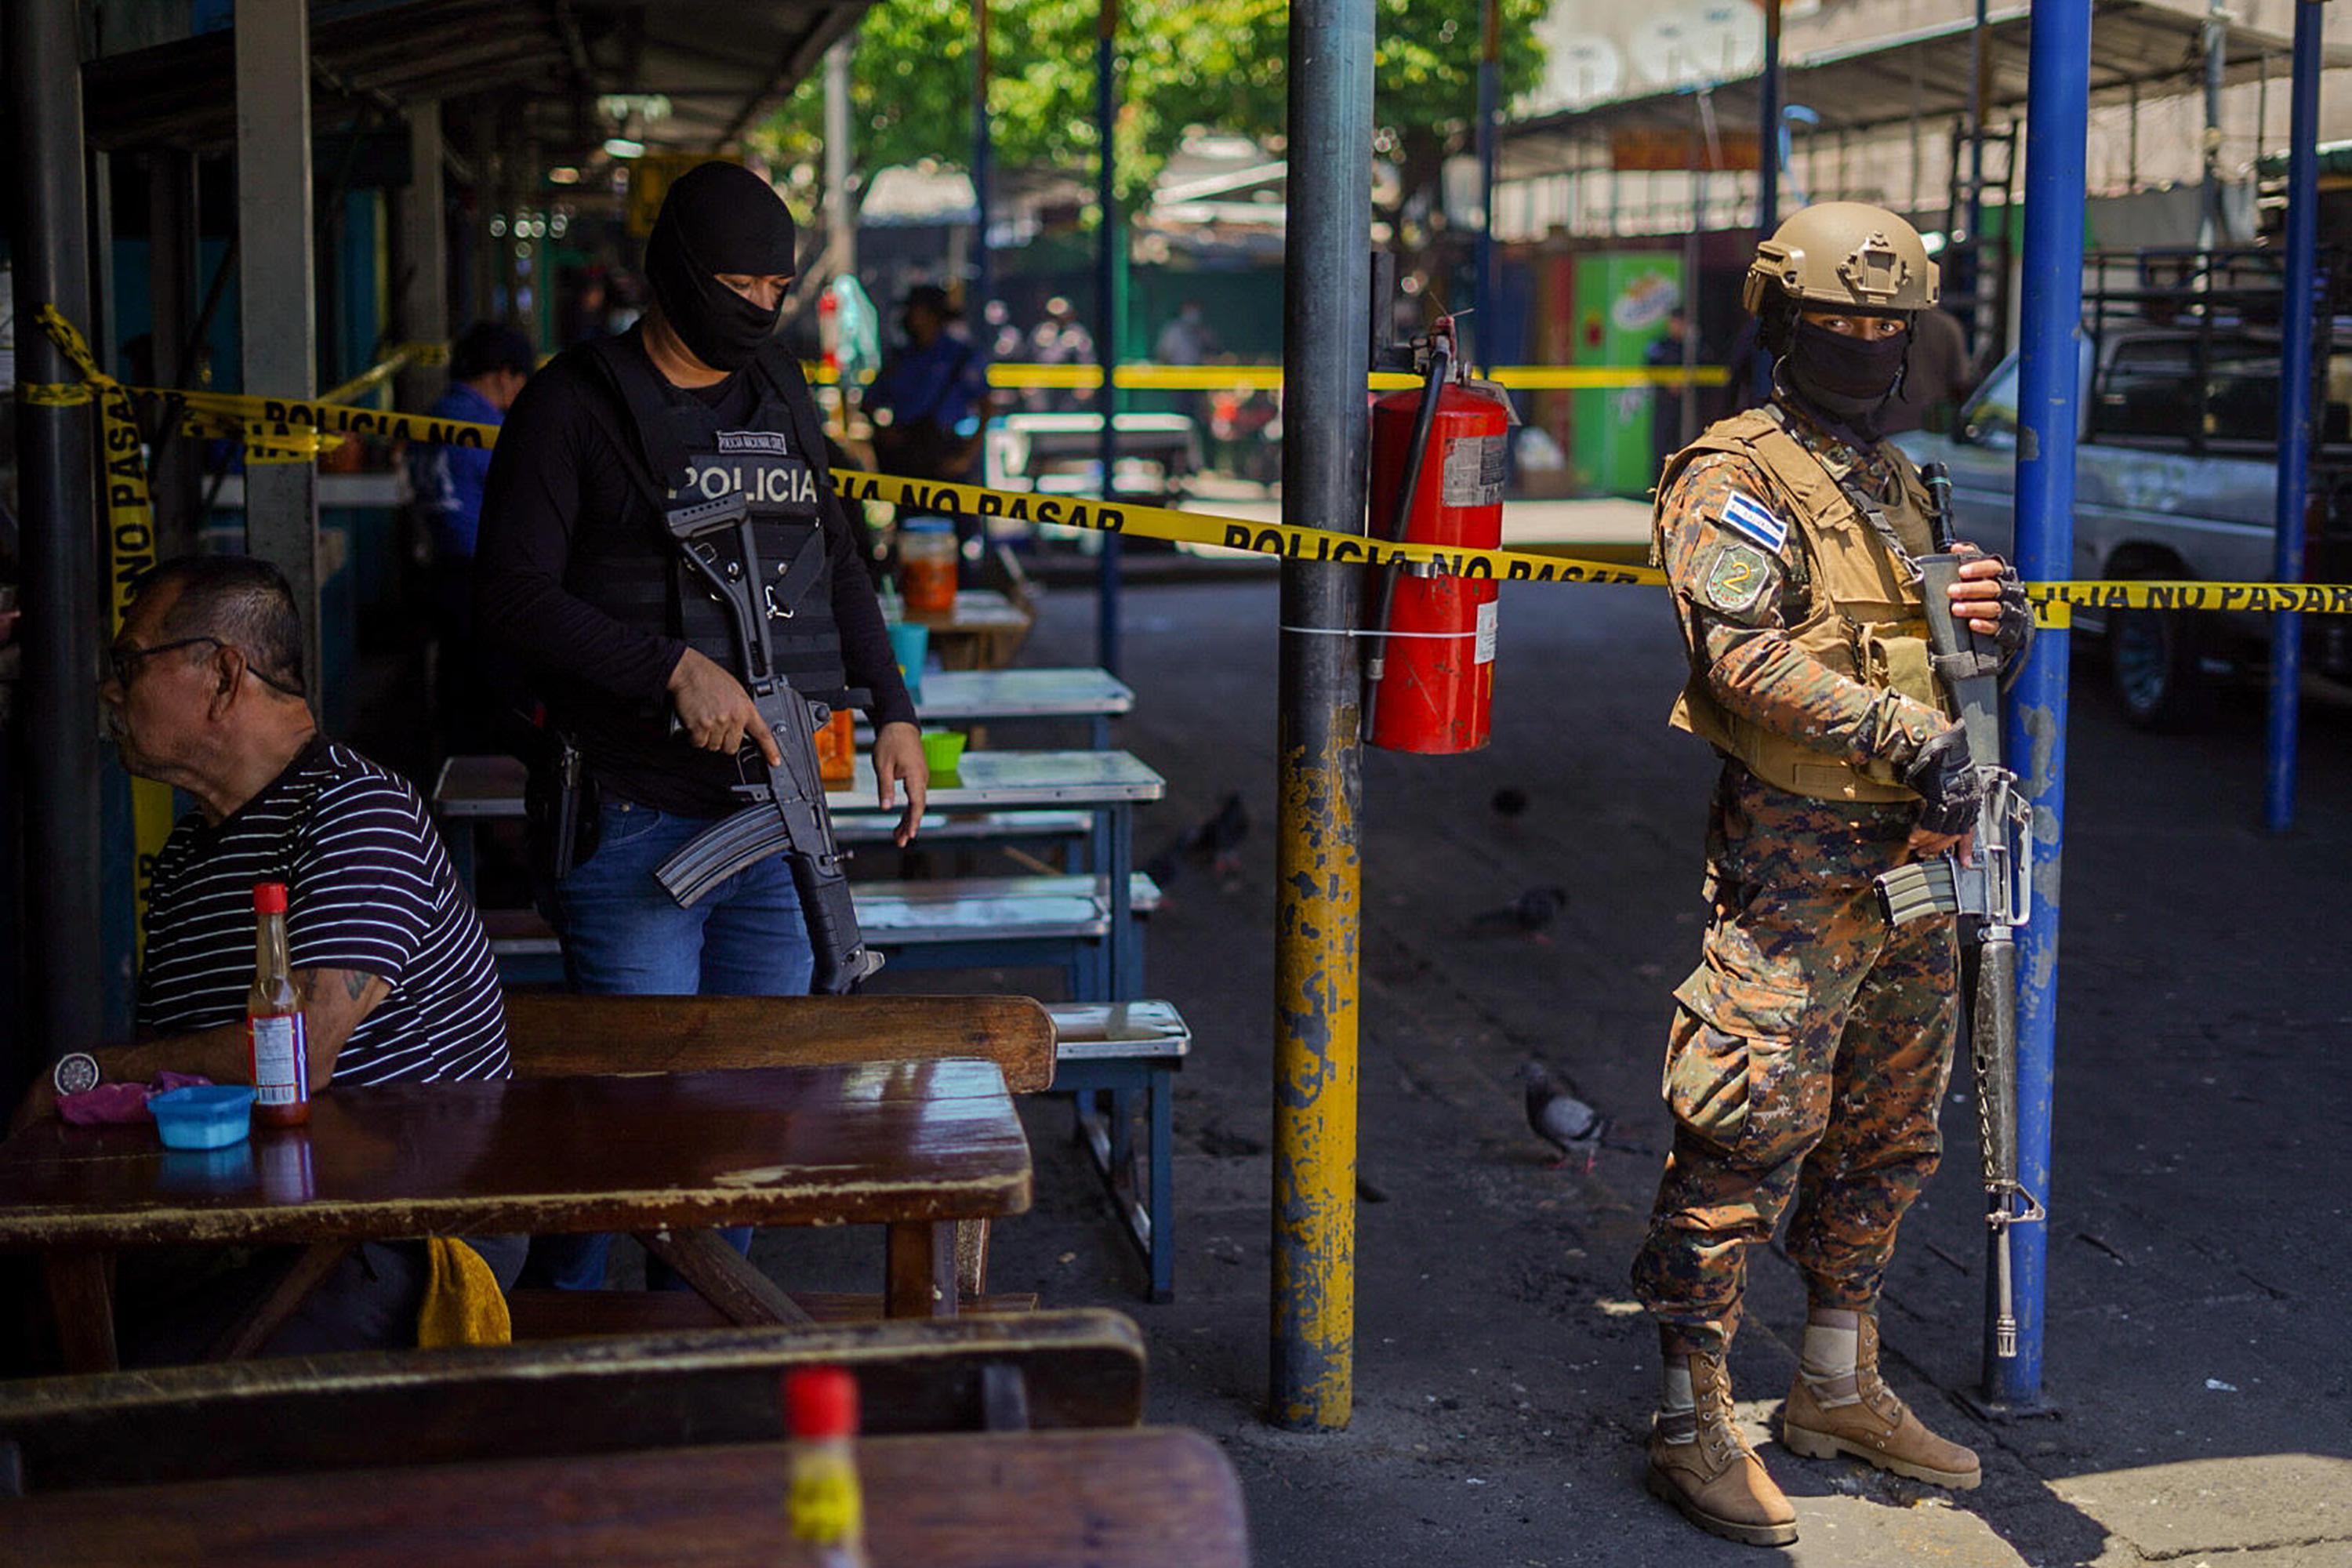 Police and soldiers stood watch at the scene of the third homicide registered in El Salvador on Sunday, March 27, 2022, in a neighborhood known as Ex-Biblioteca. Photo: Carlos Barrera/El Faro